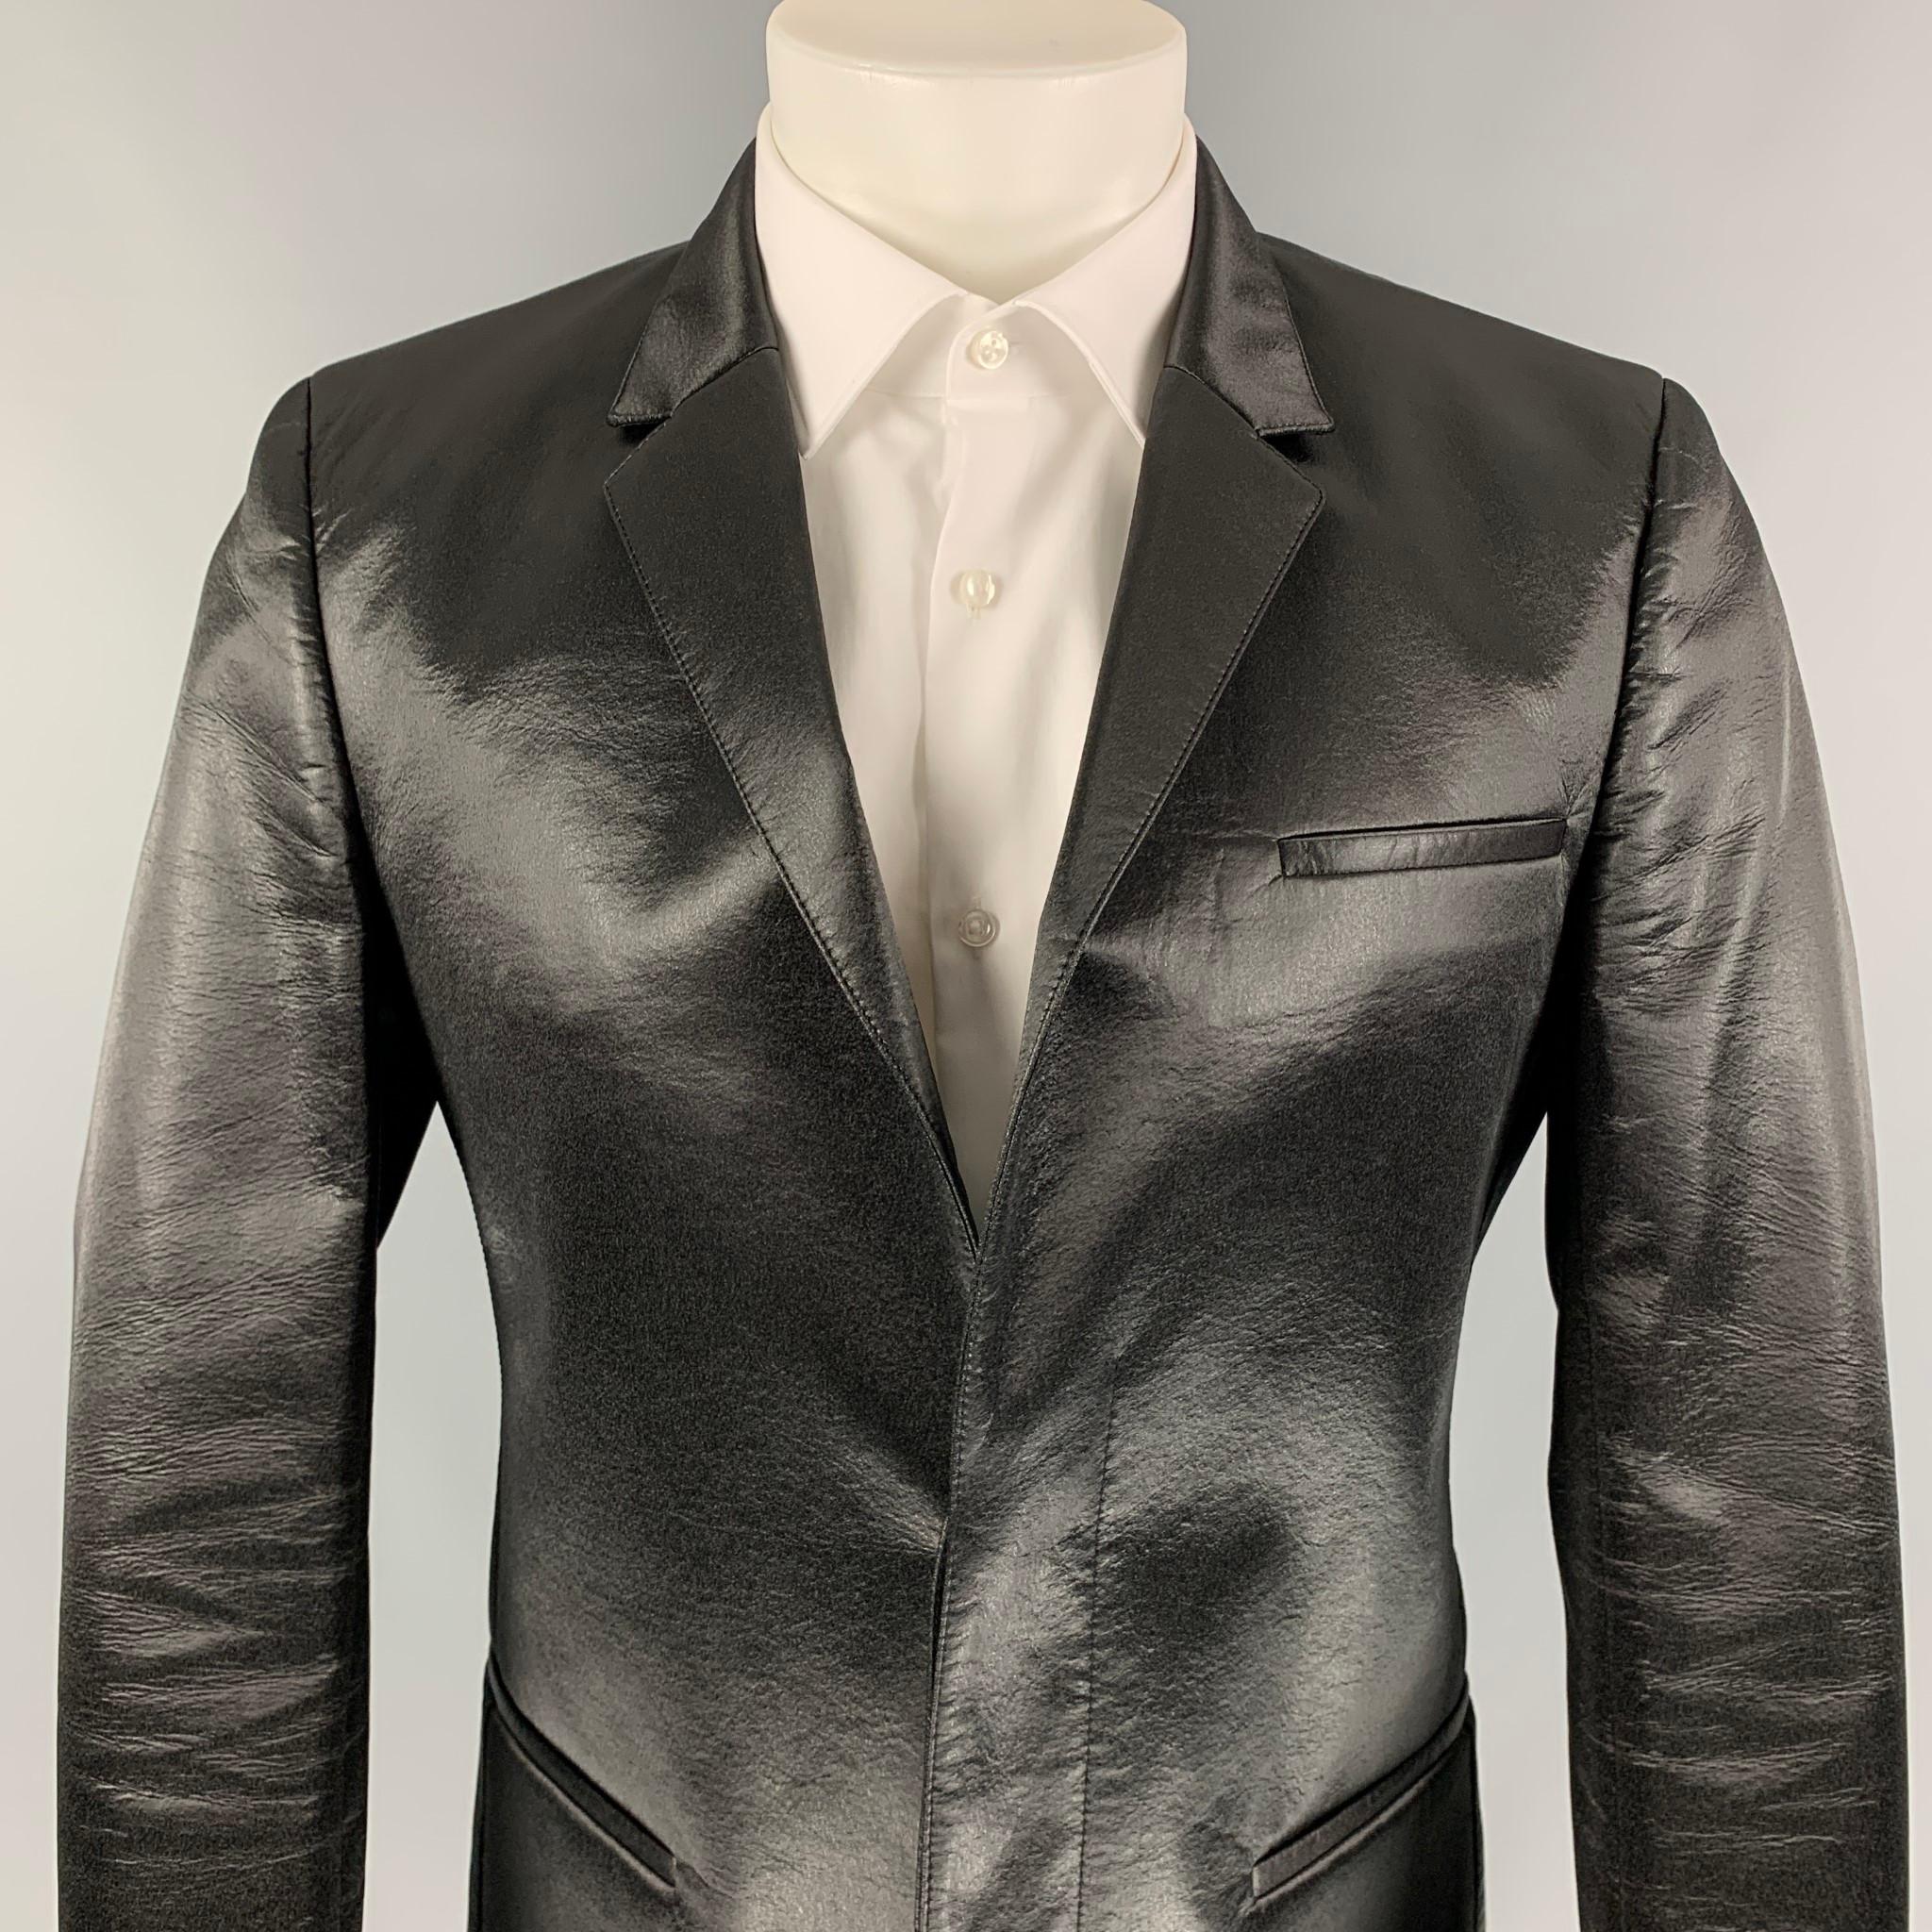 CALVIN KLEIN Collection sport coat comes in a black textured wool / spandex with a full liner featuring a notch lapel, slit pockets, double back vent, and a hidden double button closure. Made in Italy. 

Excellent Pre-Owned Condition.
Marked: